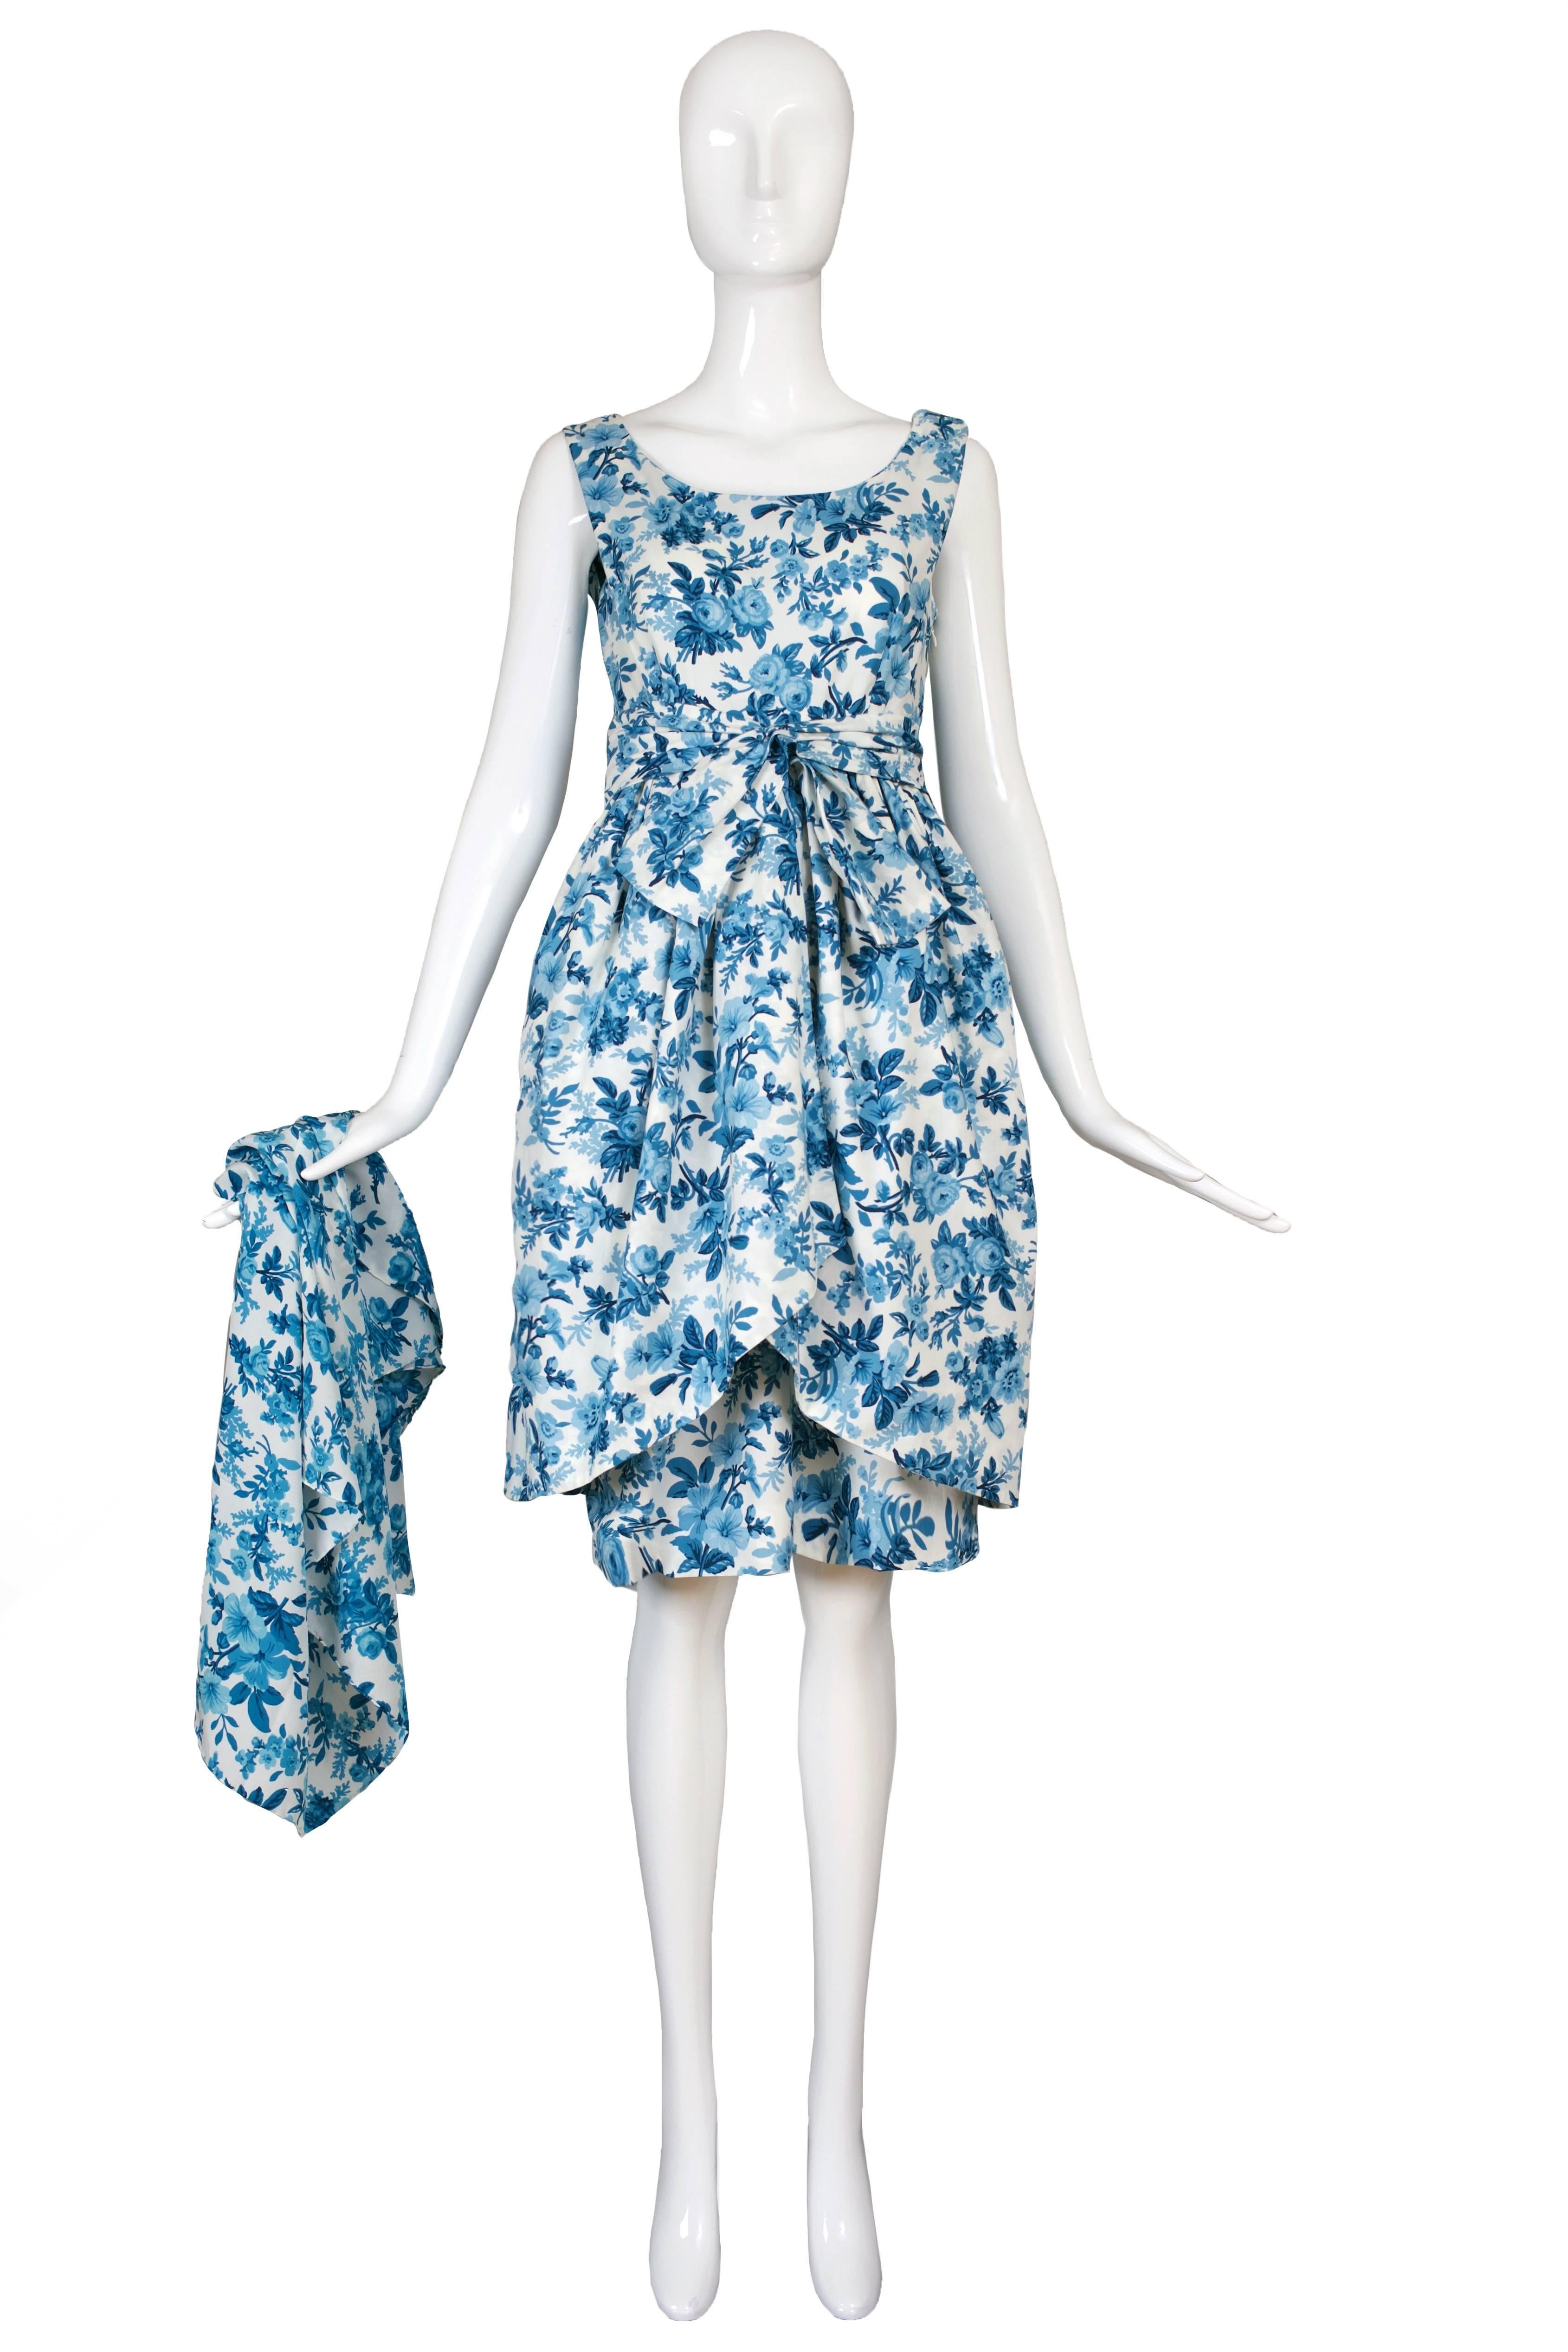 Balenciaga by Nicolas Ghesquiere cotton blue and white floral summer dress inspired by 1950's garden party. The dress has full skirt with peplum overlay and intricate hook and eye fasteners. There is a self sash belt & scarf to complete the look. In